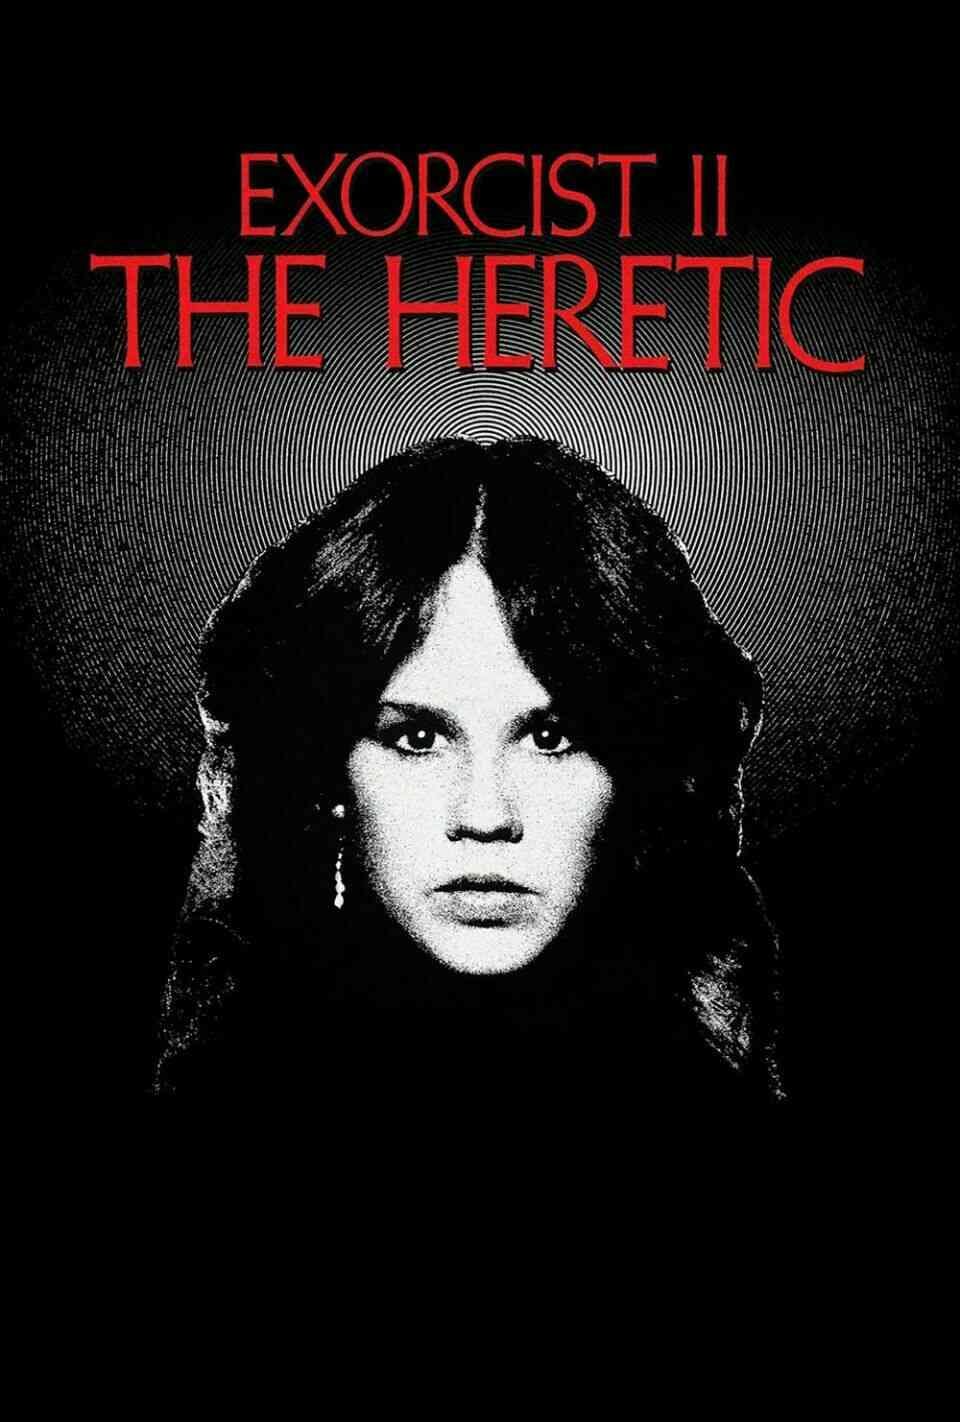 Read The Heretic screenplay (poster)